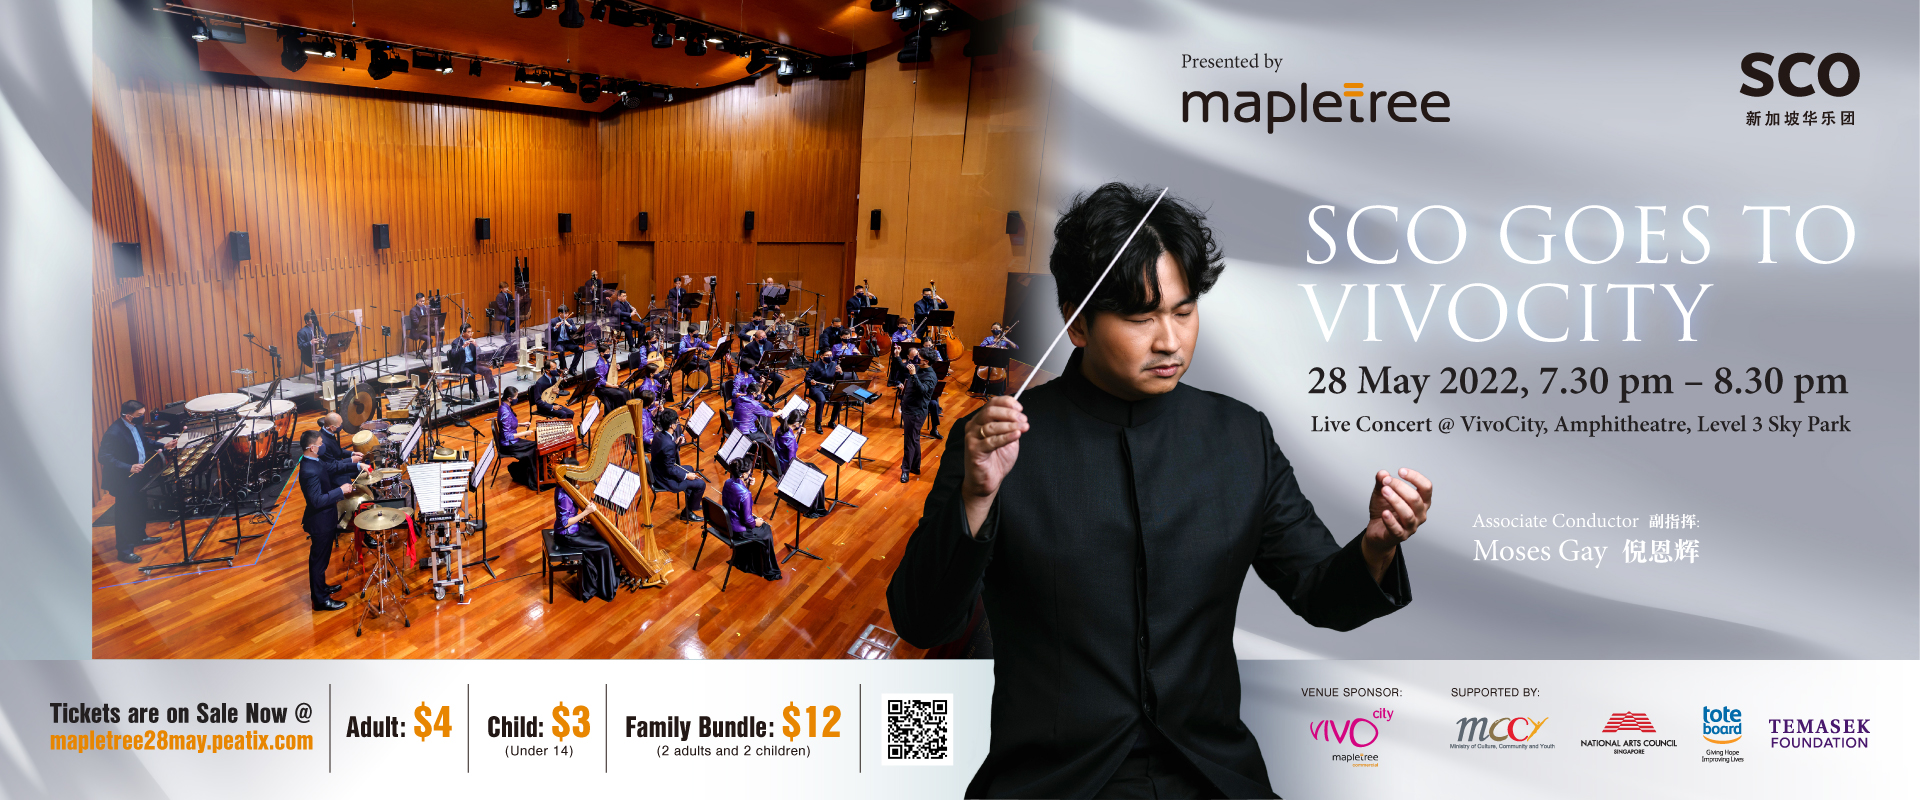 SCO_Mapletree_Concert_1920x800_3 SCO Lunchtime Concerts